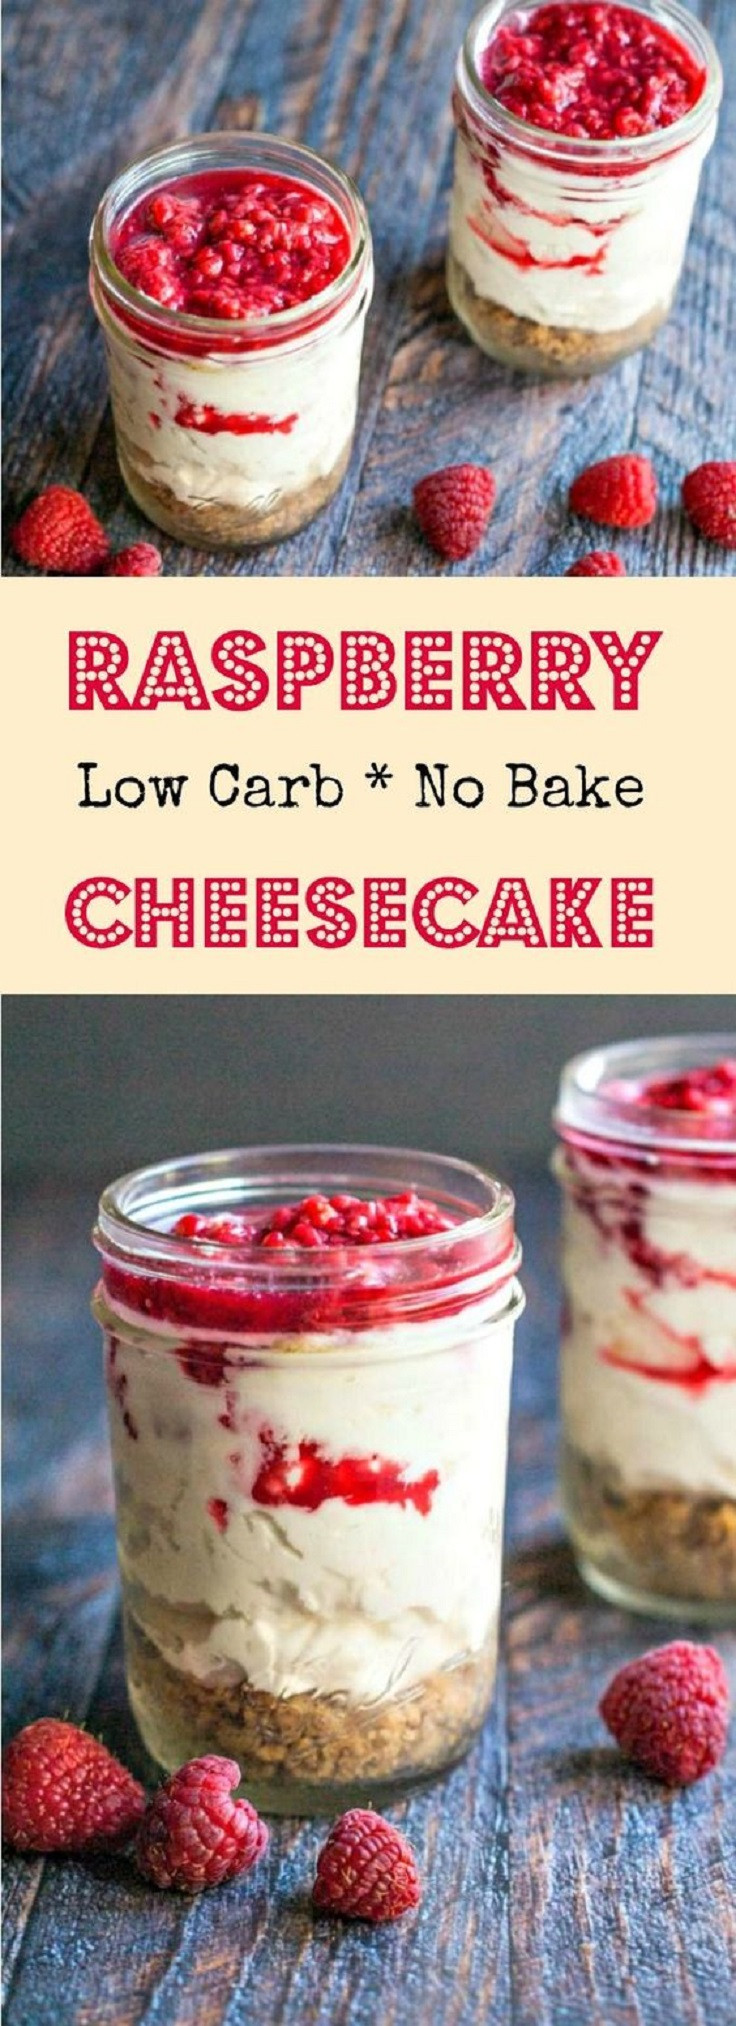 No Carb Dessert
 13 Easy Low Carb Recipes Healthy Breakfast Lunch